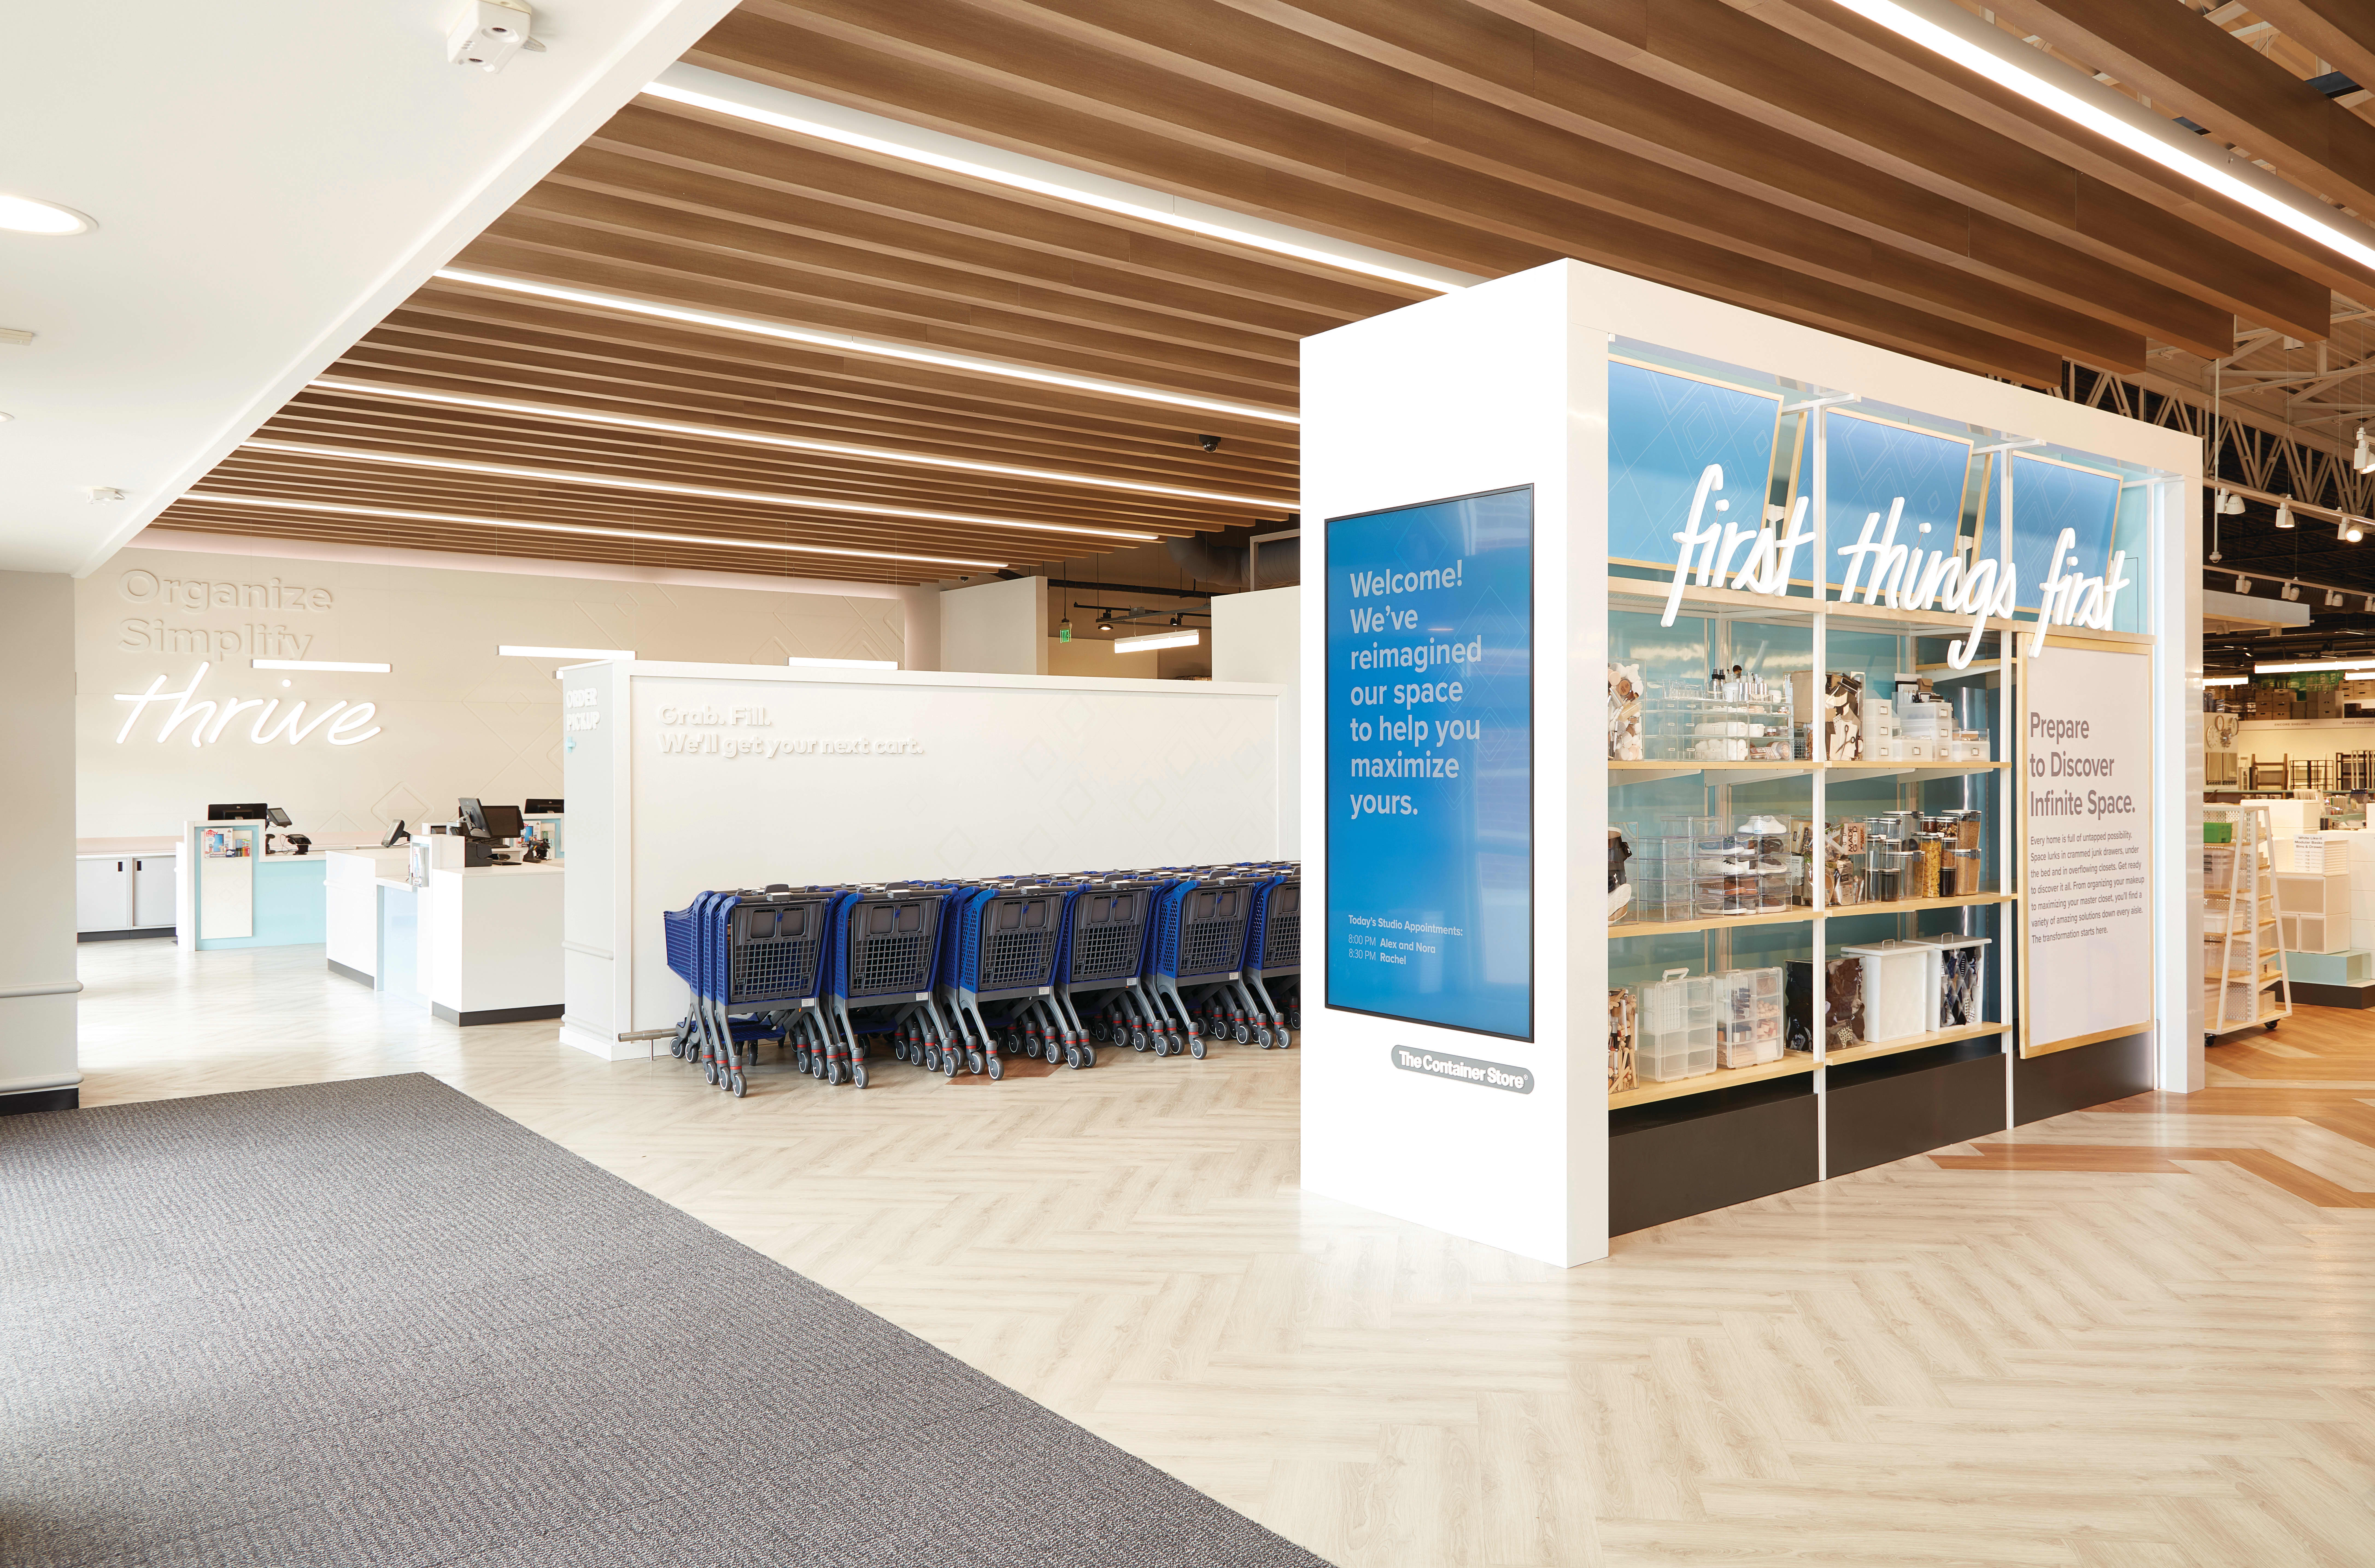 The Container Store is redesigning its stores to include more tech